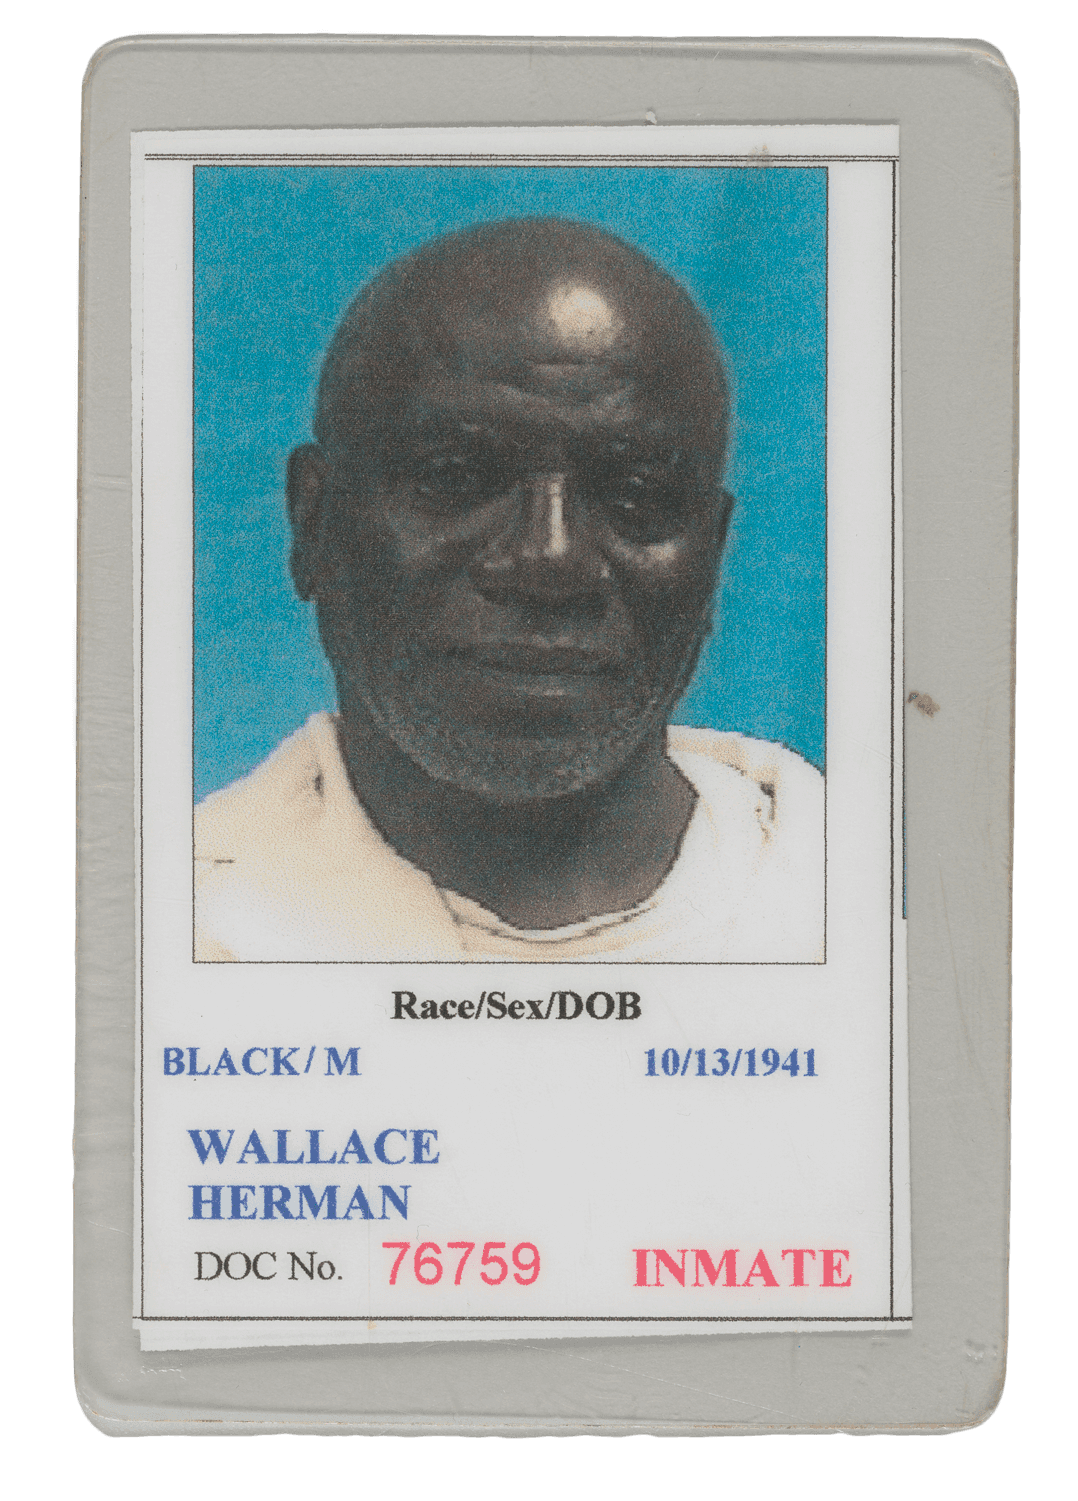 A prison badge with a large photo of Herman Wallace. It has his date, name, DOC No., race, and sex listed.